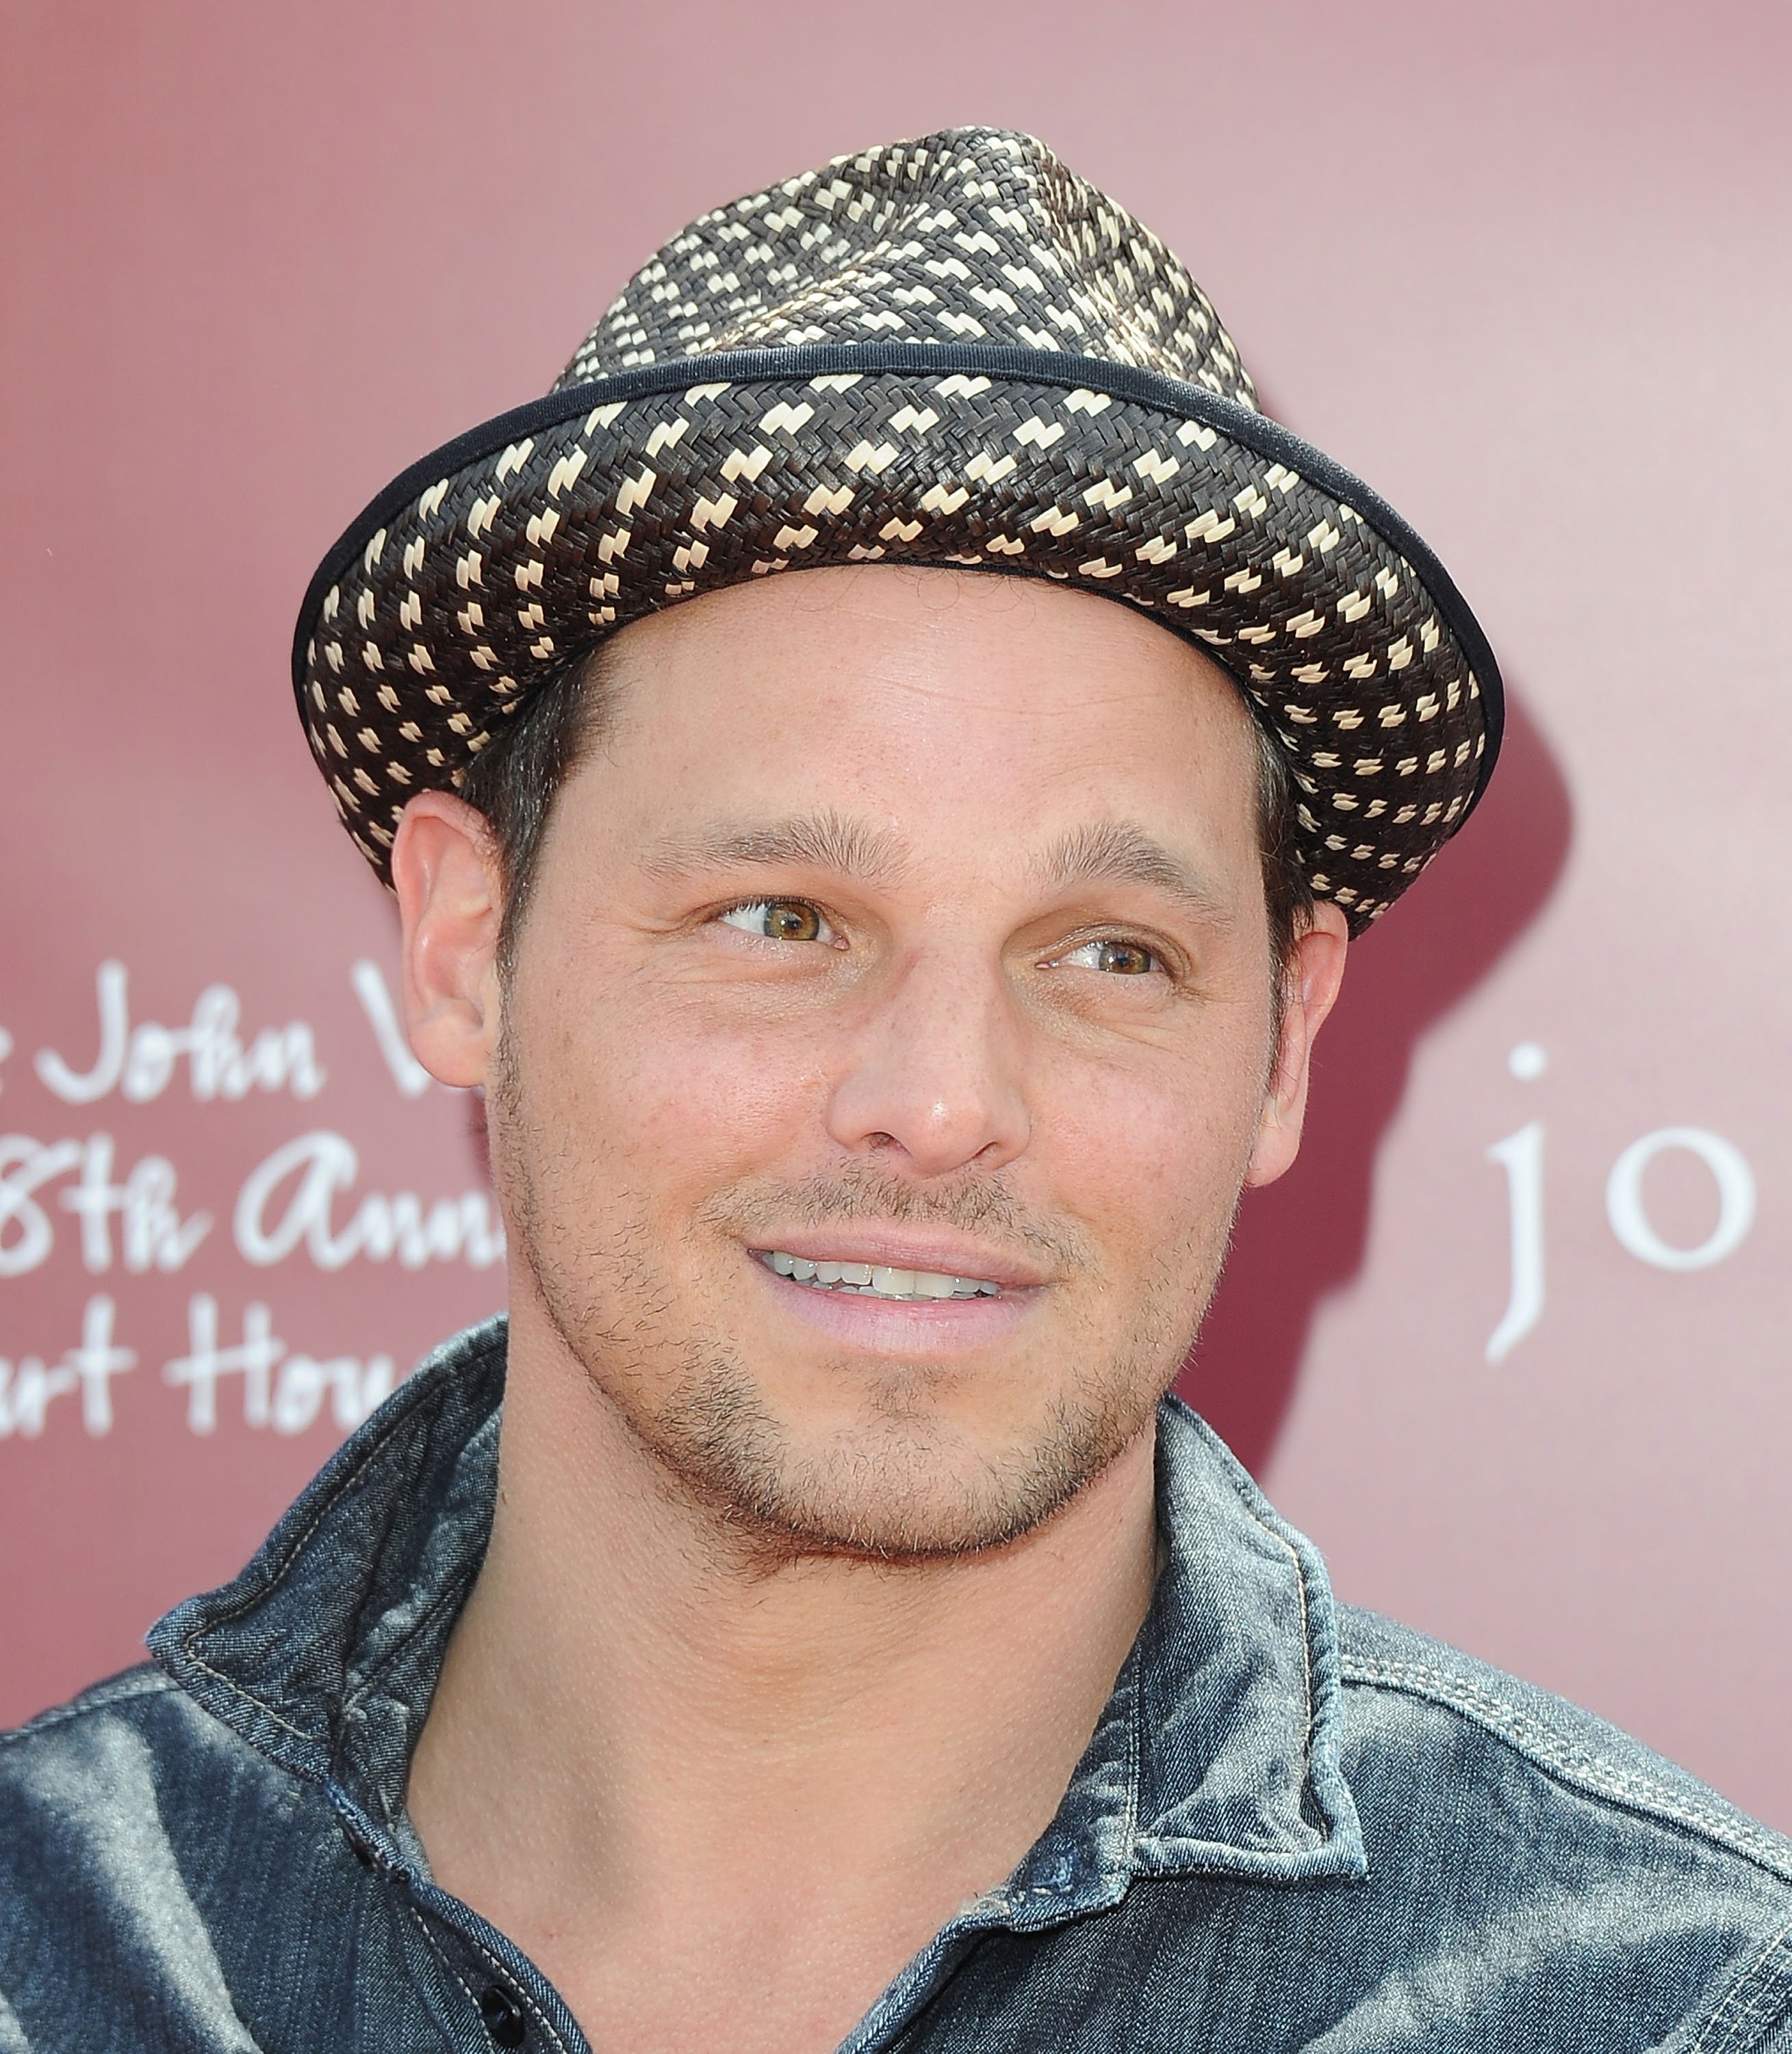 Justin Chambers attends John Varvatos' 8th Annual Stuart House Benefit at the John Vavatos Store on March 13, 2011, in West Hollywood, California. | Source: Getty Images.